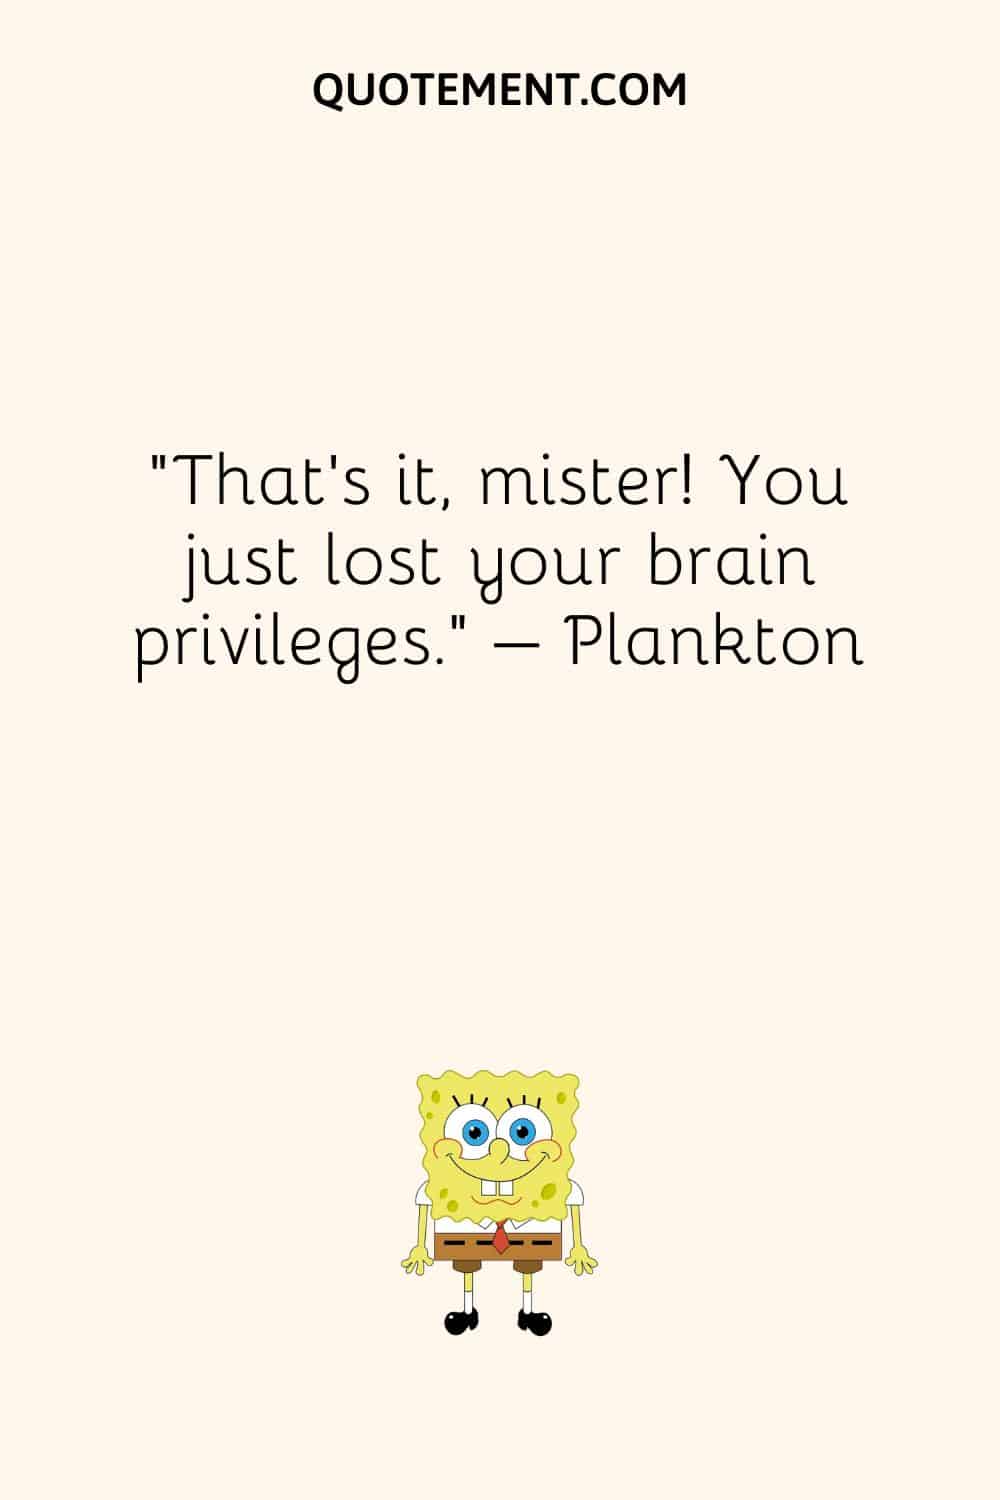 “That’s it, mister! You just lost your brain privileges.” – Plankton (2)